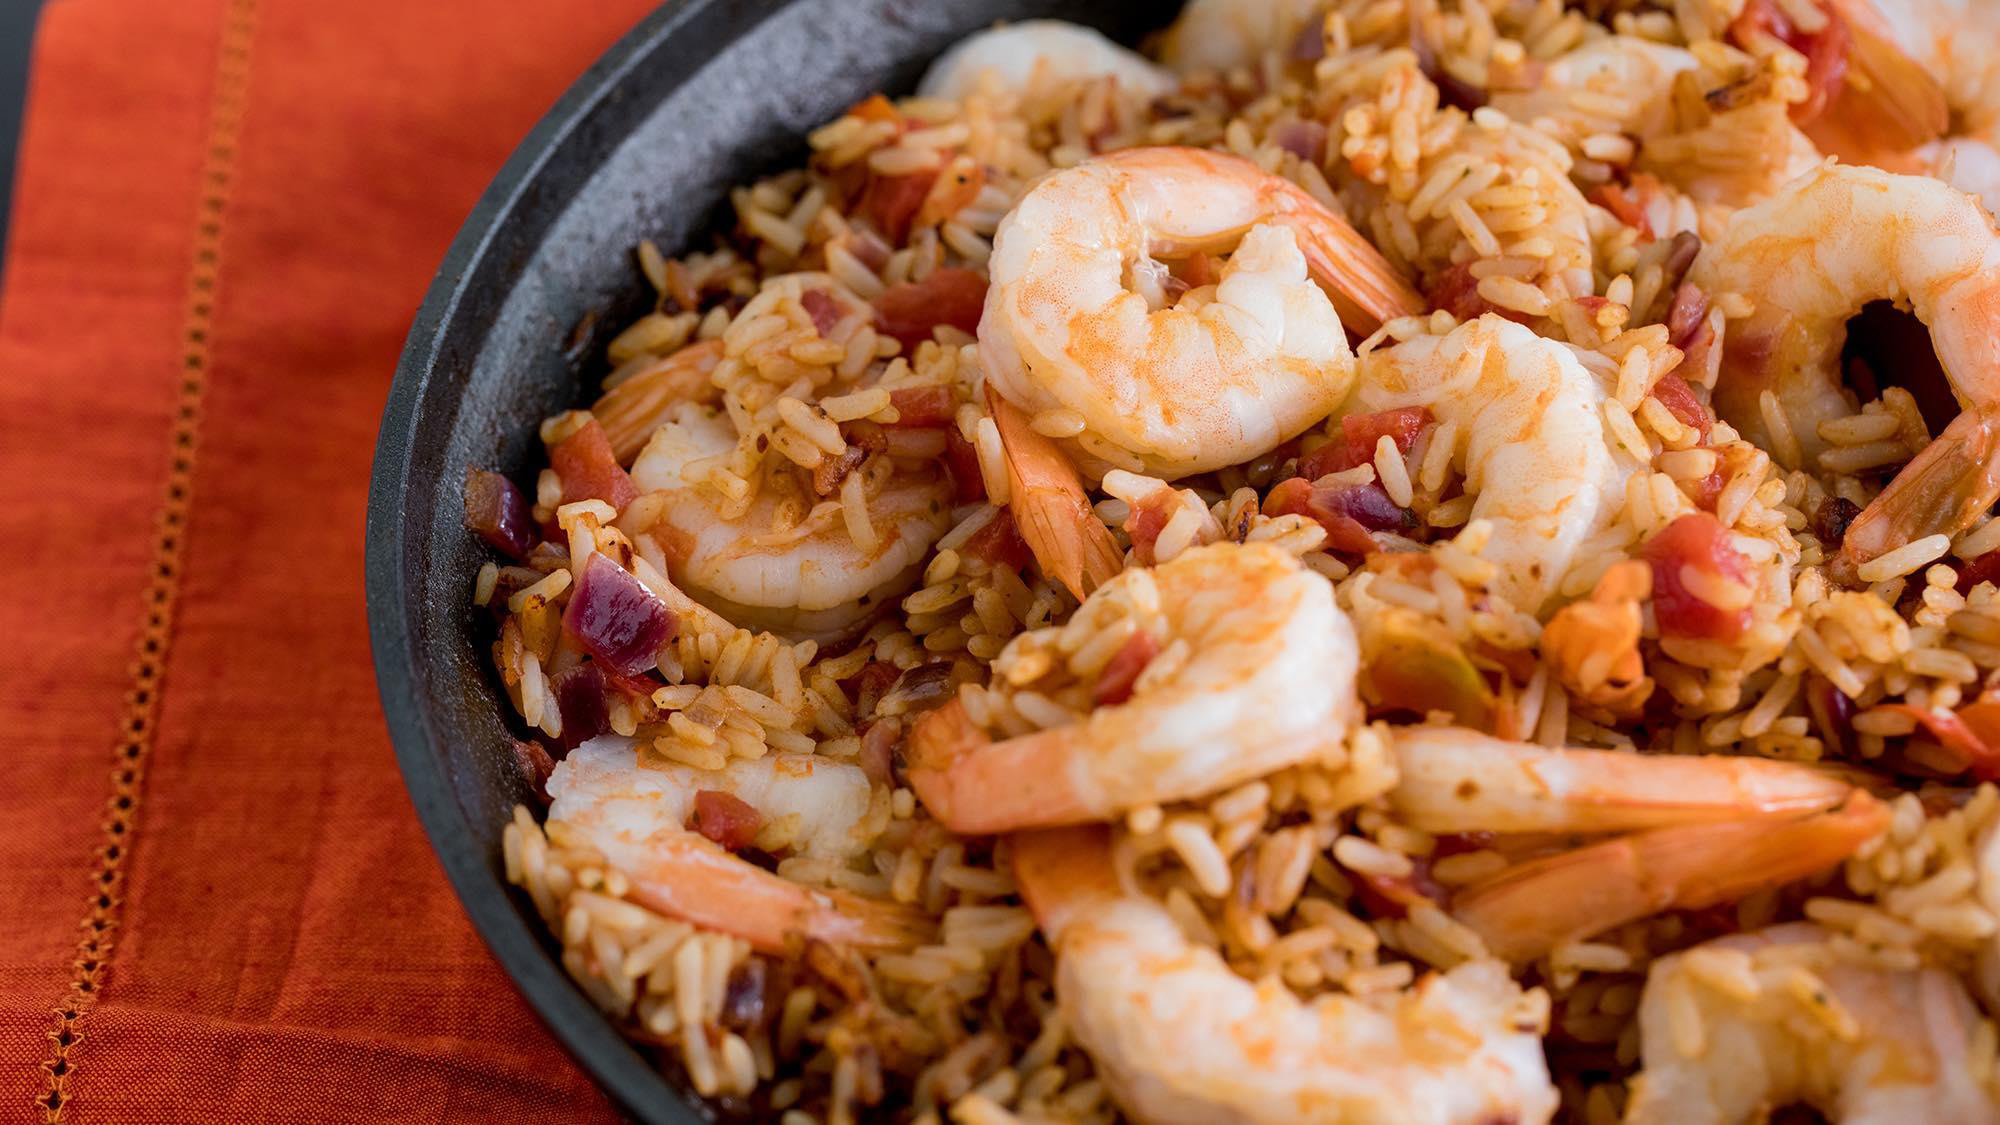 Shrimp and Veggie Cilantro Lime Rice: Bring new life to weeknight meals with the zesty lime and herb flavor of Zatarain’s Cilantro Lime Rice. Simmer rice with shrimp, diced tomatoes and butter to create a one-skillet feast for the whole family to enjoy.